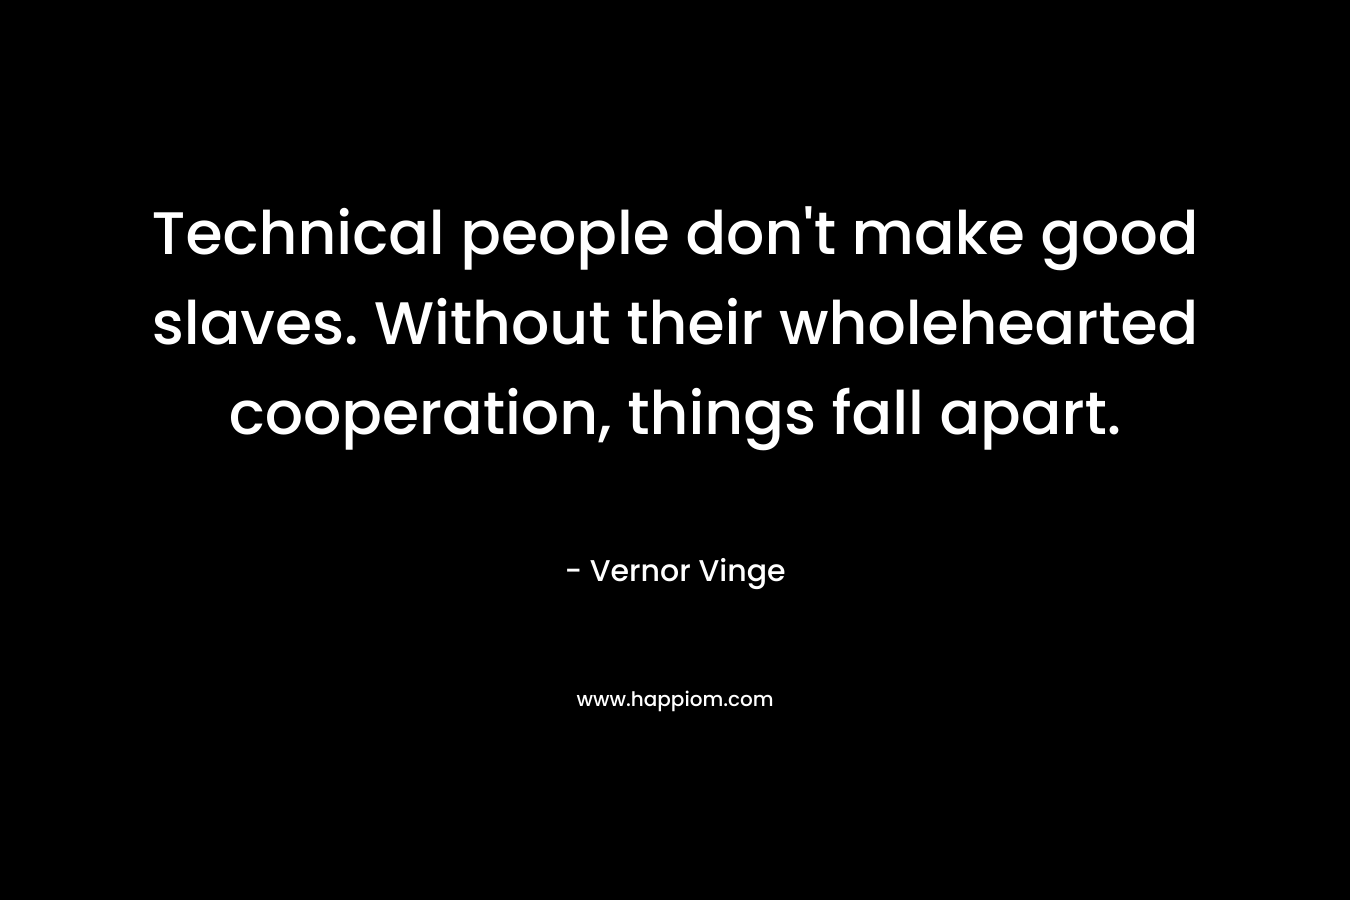 Technical people don’t make good slaves. Without their wholehearted cooperation, things fall apart. – Vernor Vinge